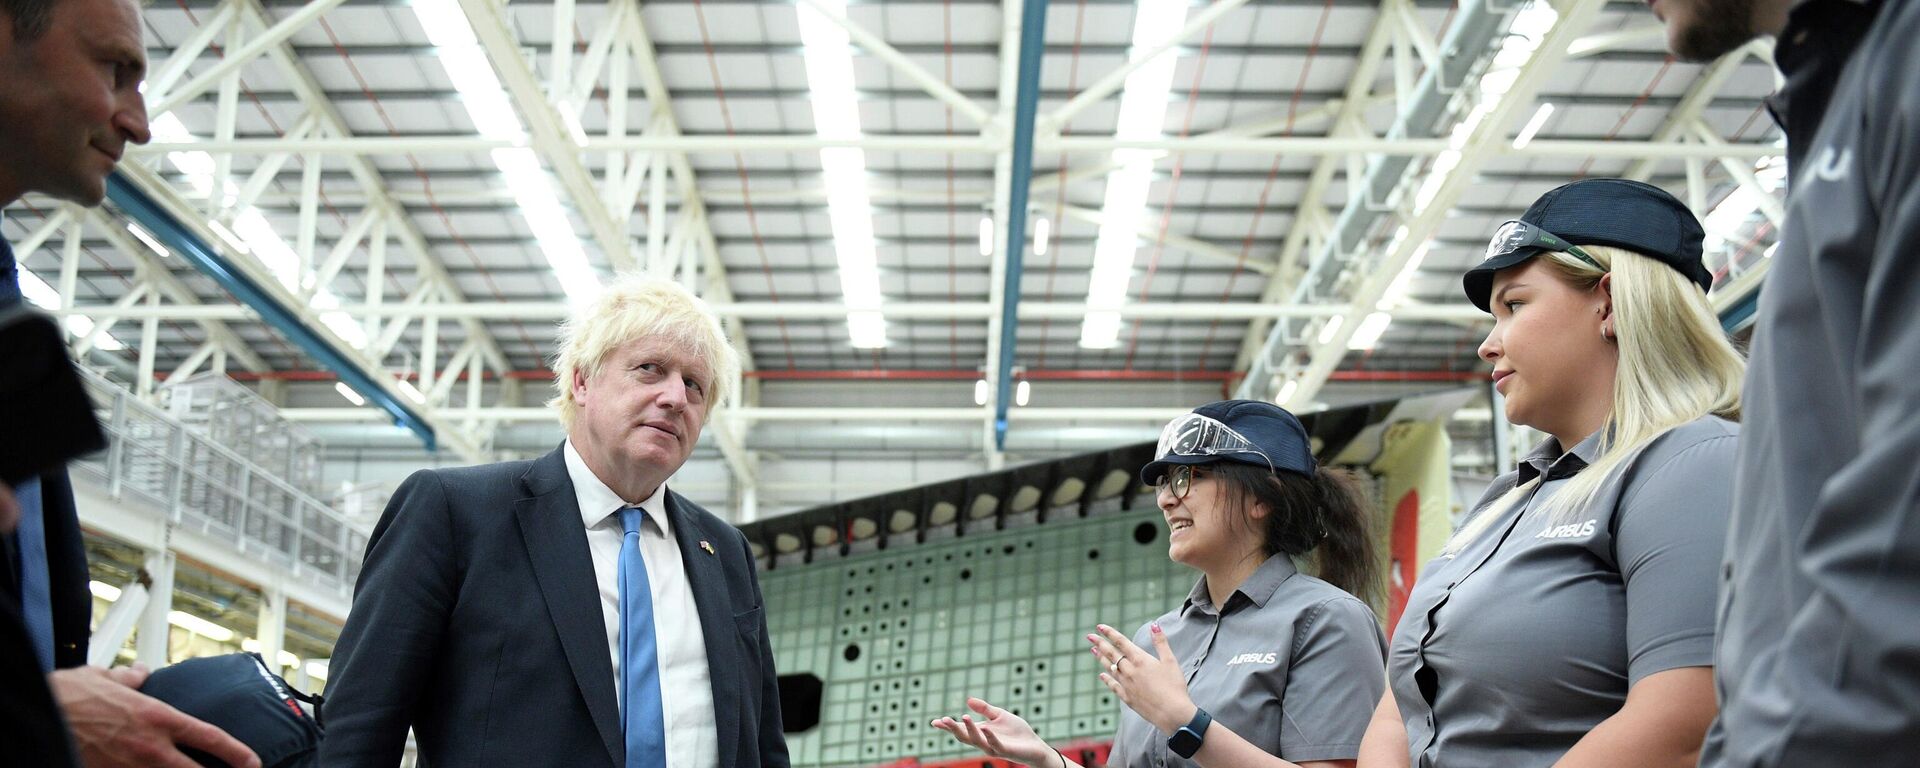 Britain's Prime Minister Boris Johnson meets apprentices during a visit to the Airbus UK East Factory in Broughton, North Wales - Sputnik International, 1920, 02.09.2022